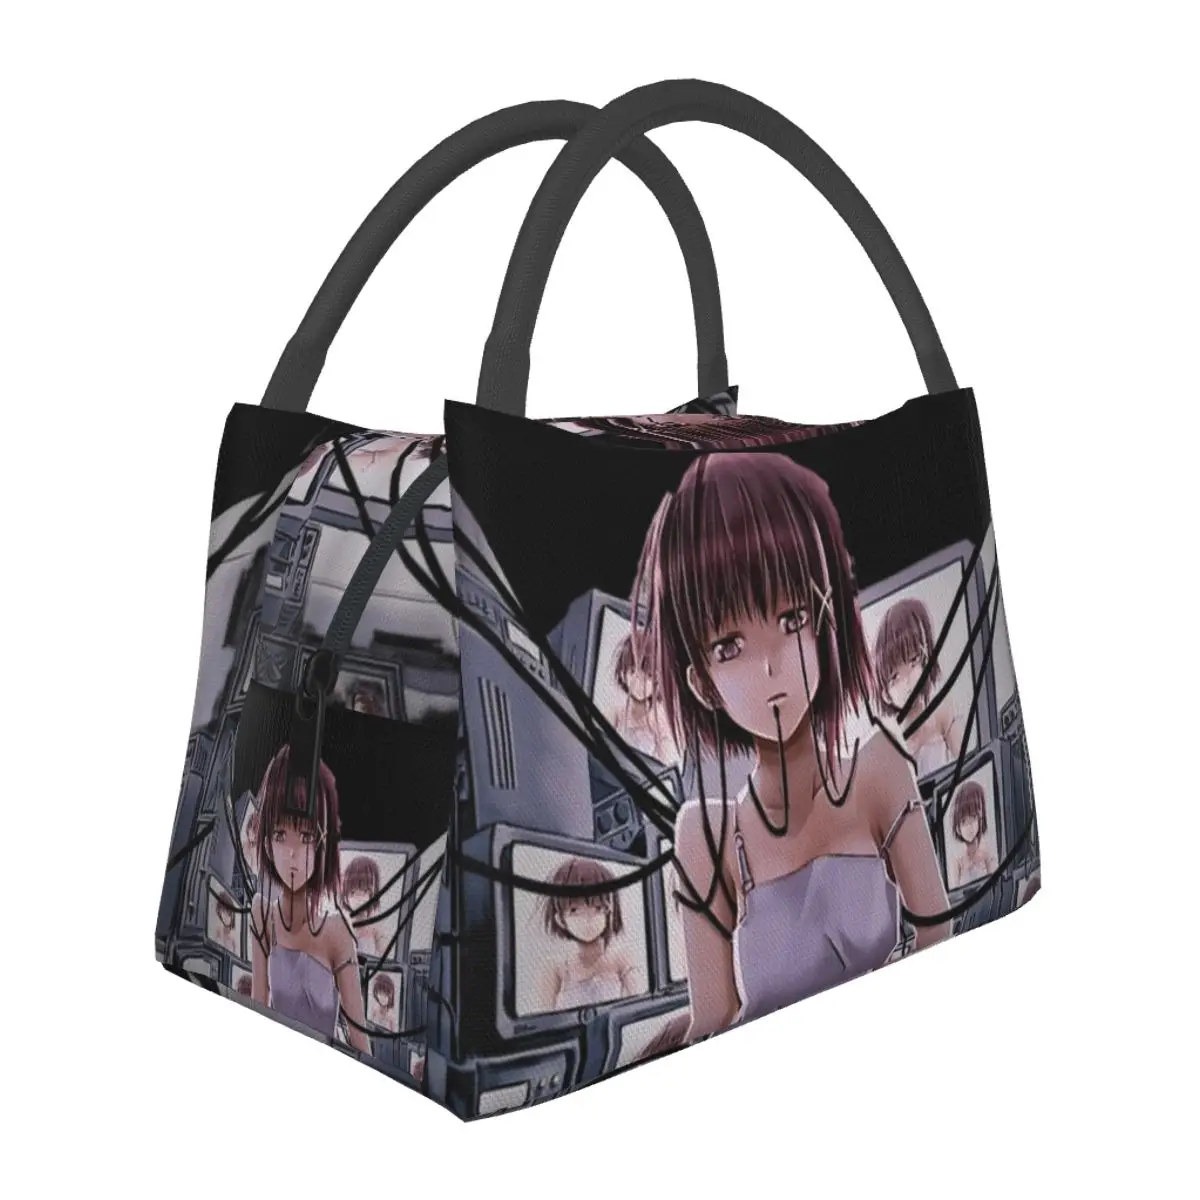 

Lain Iwakura Serial Experiments Lain Lunch Bag Anime Travel Lunch Box Fashion Print Lunch Bags Waterproof Portable Cooler Bag